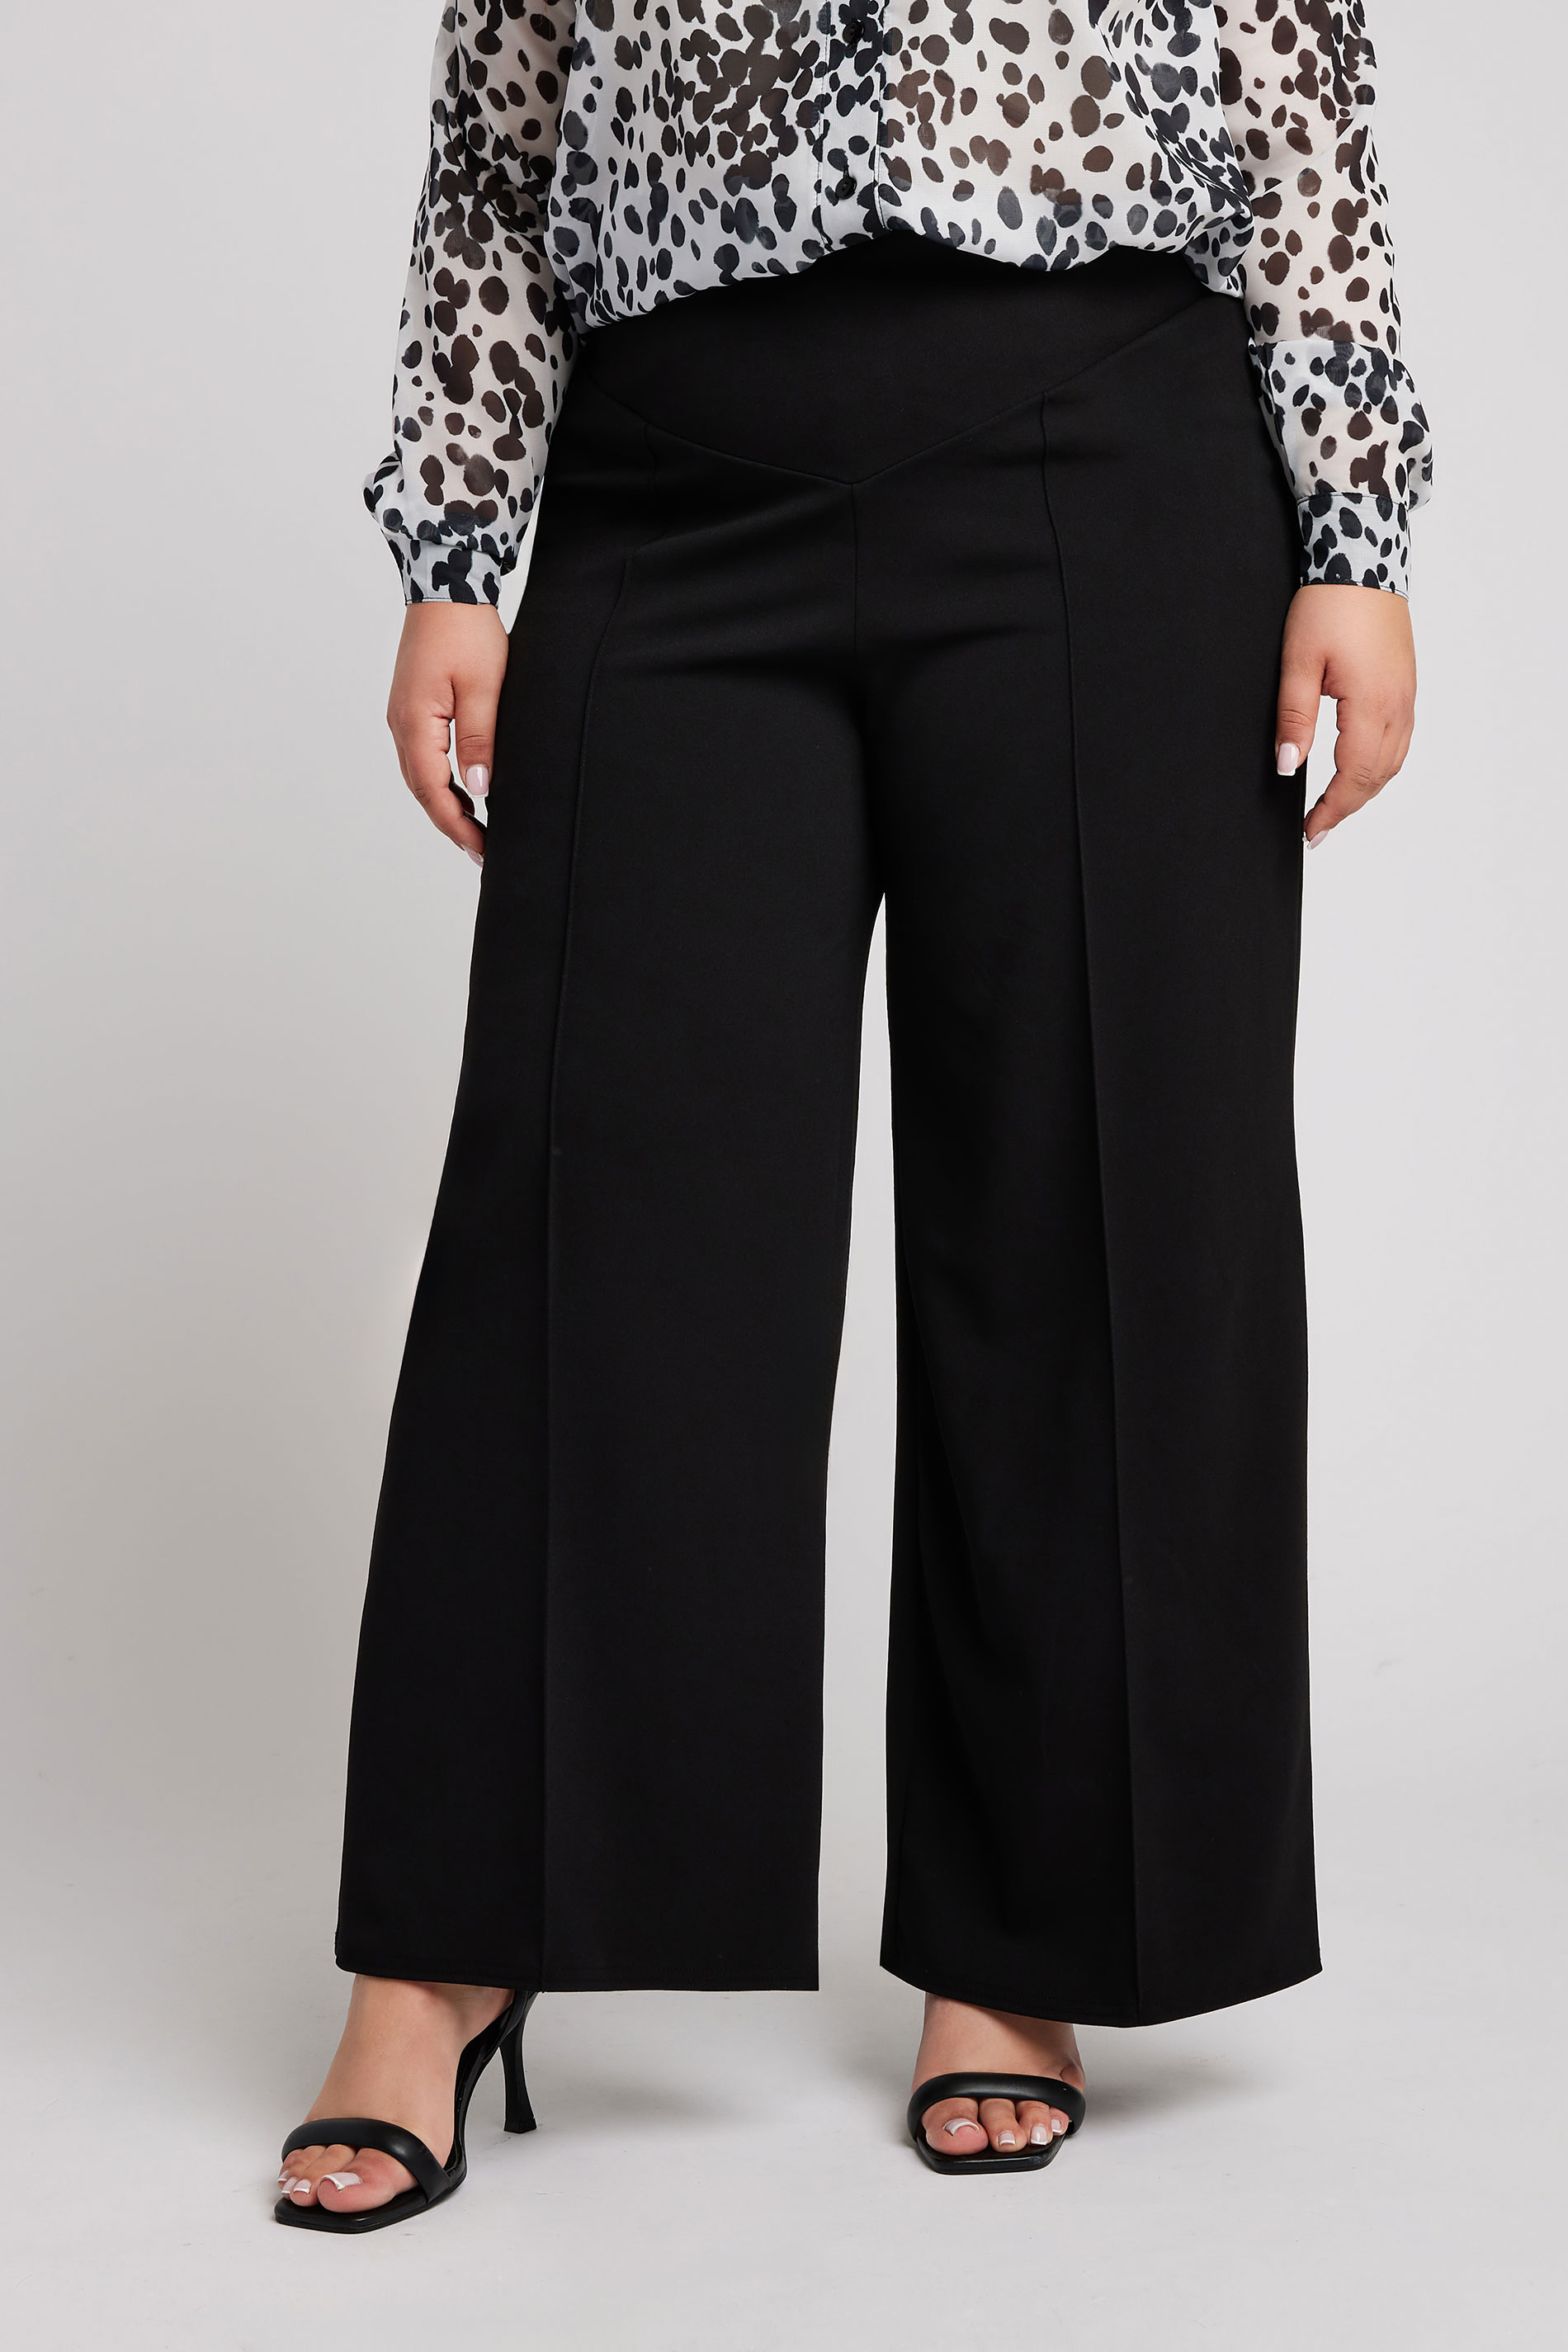 YOURS LONDON Plus Size Black Panelled Trousers | Yours Clothing 2